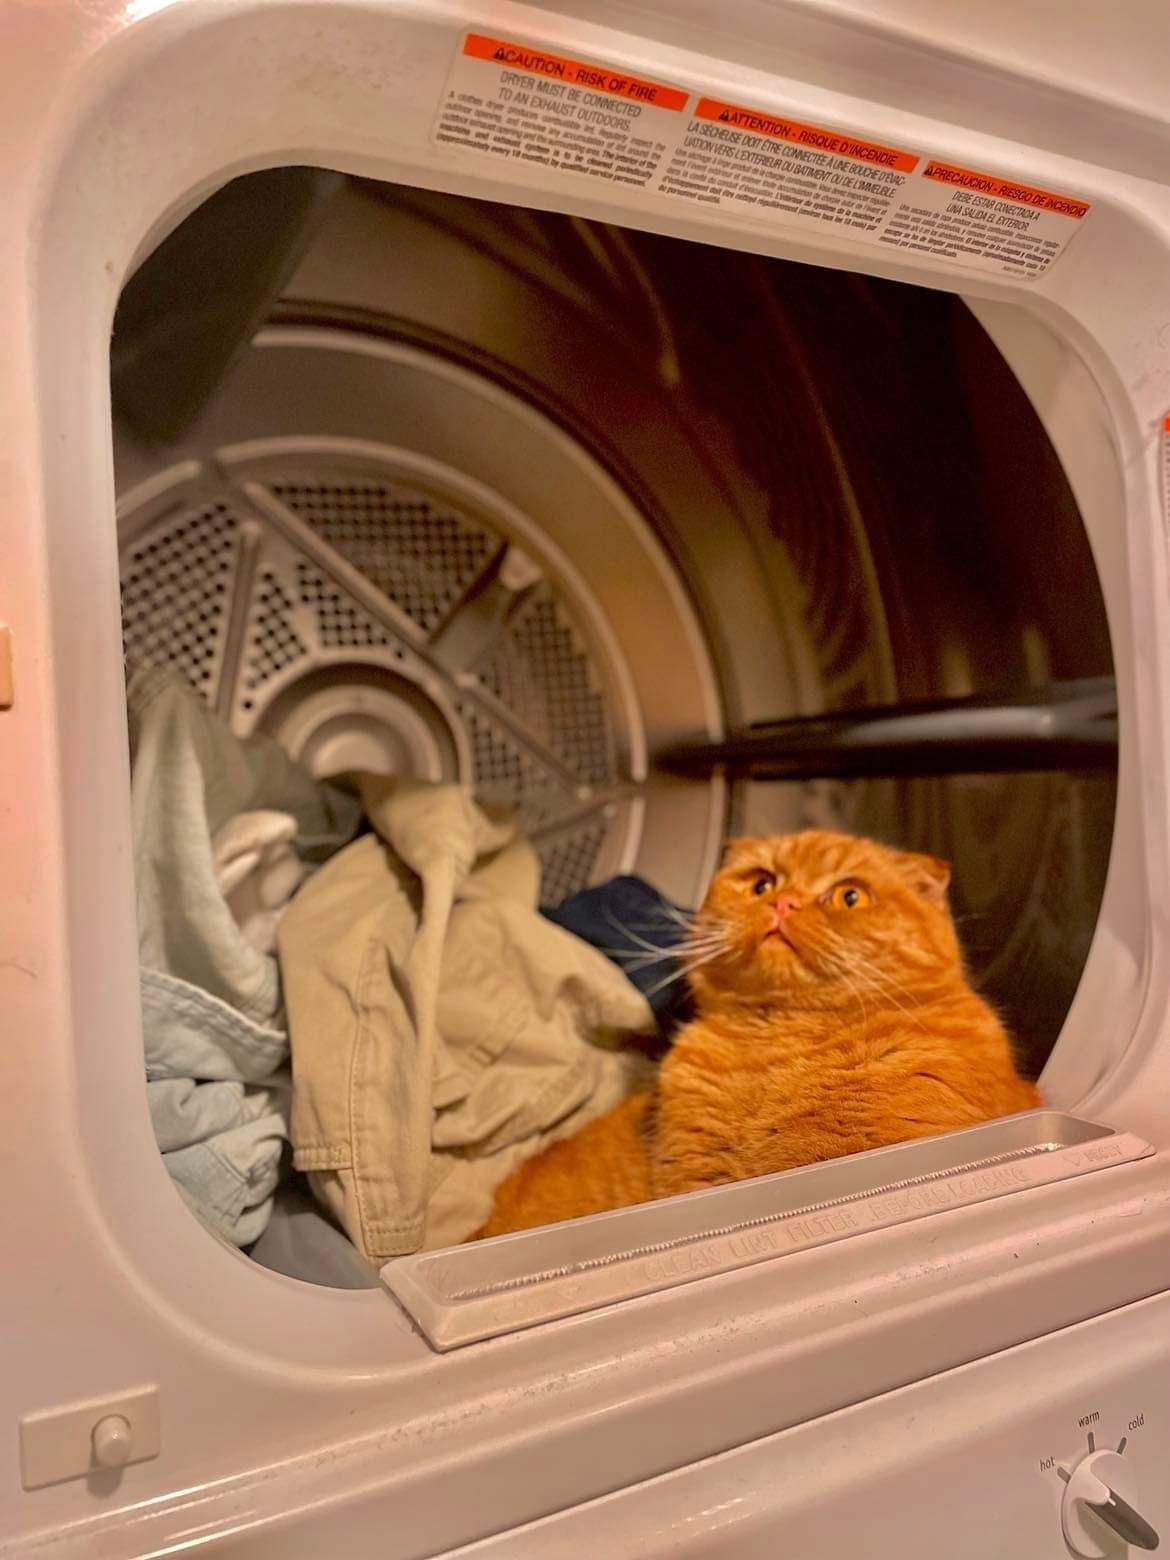 Our cat now lives in our dryer.